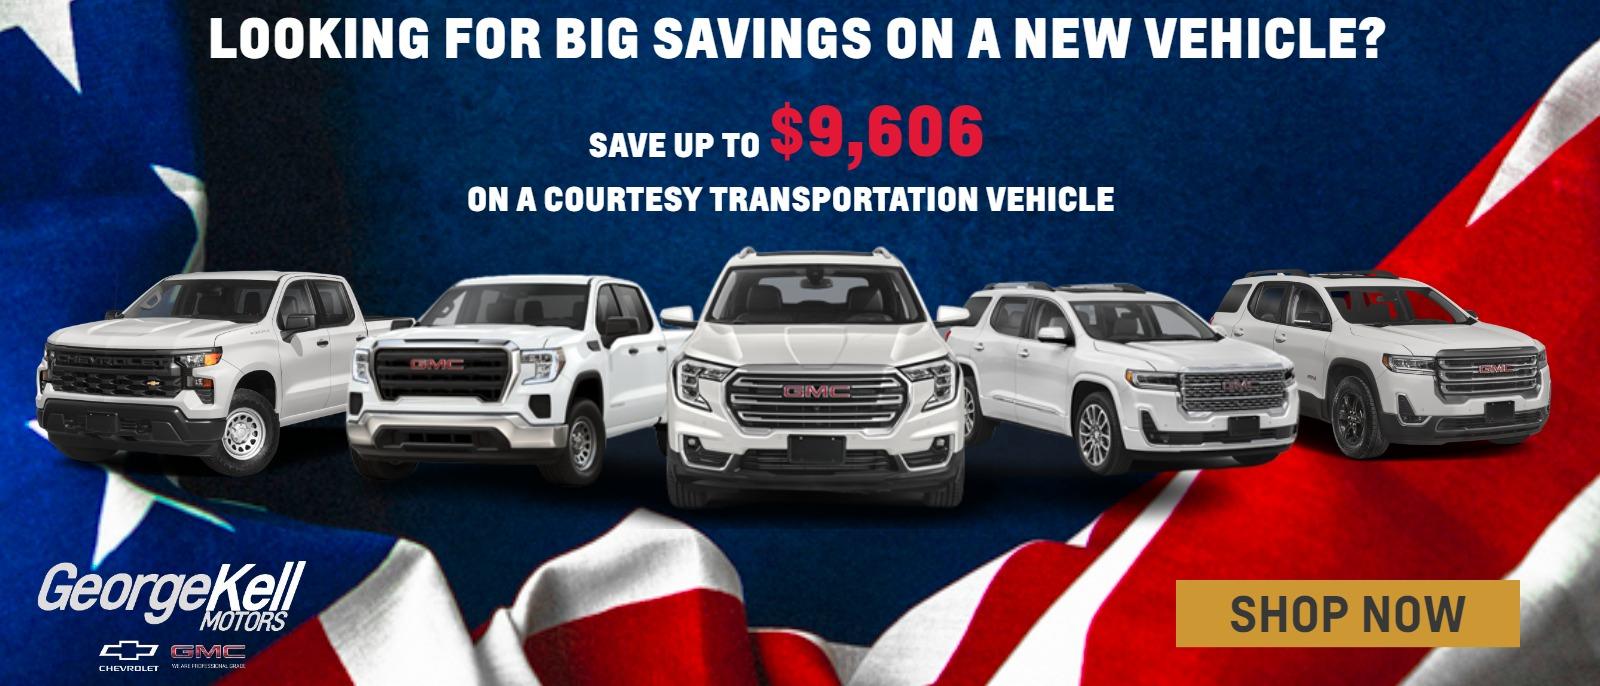 LOOKING FOR BIG SAVINGS ON A NEW VEHICLE? 
SAVE UP TO $9,606 ON A COURTESY TRANSPORTATION VEHICLE